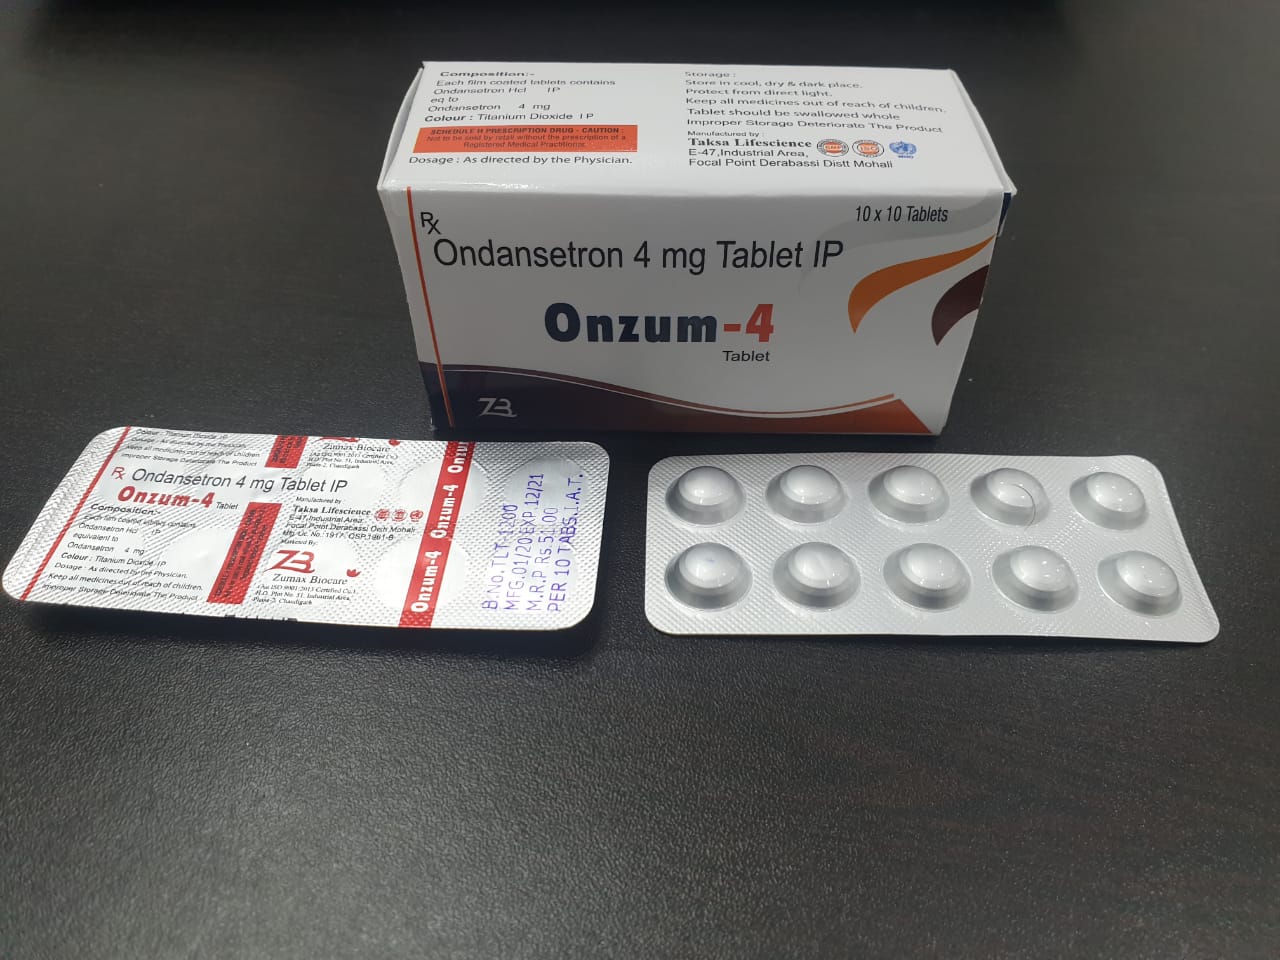 Product Name: ONZUM 4, Compositions of Ondansetron 4mg Tablets IP are Ondansetron 4mg Tablets IP - Zumax Biocare